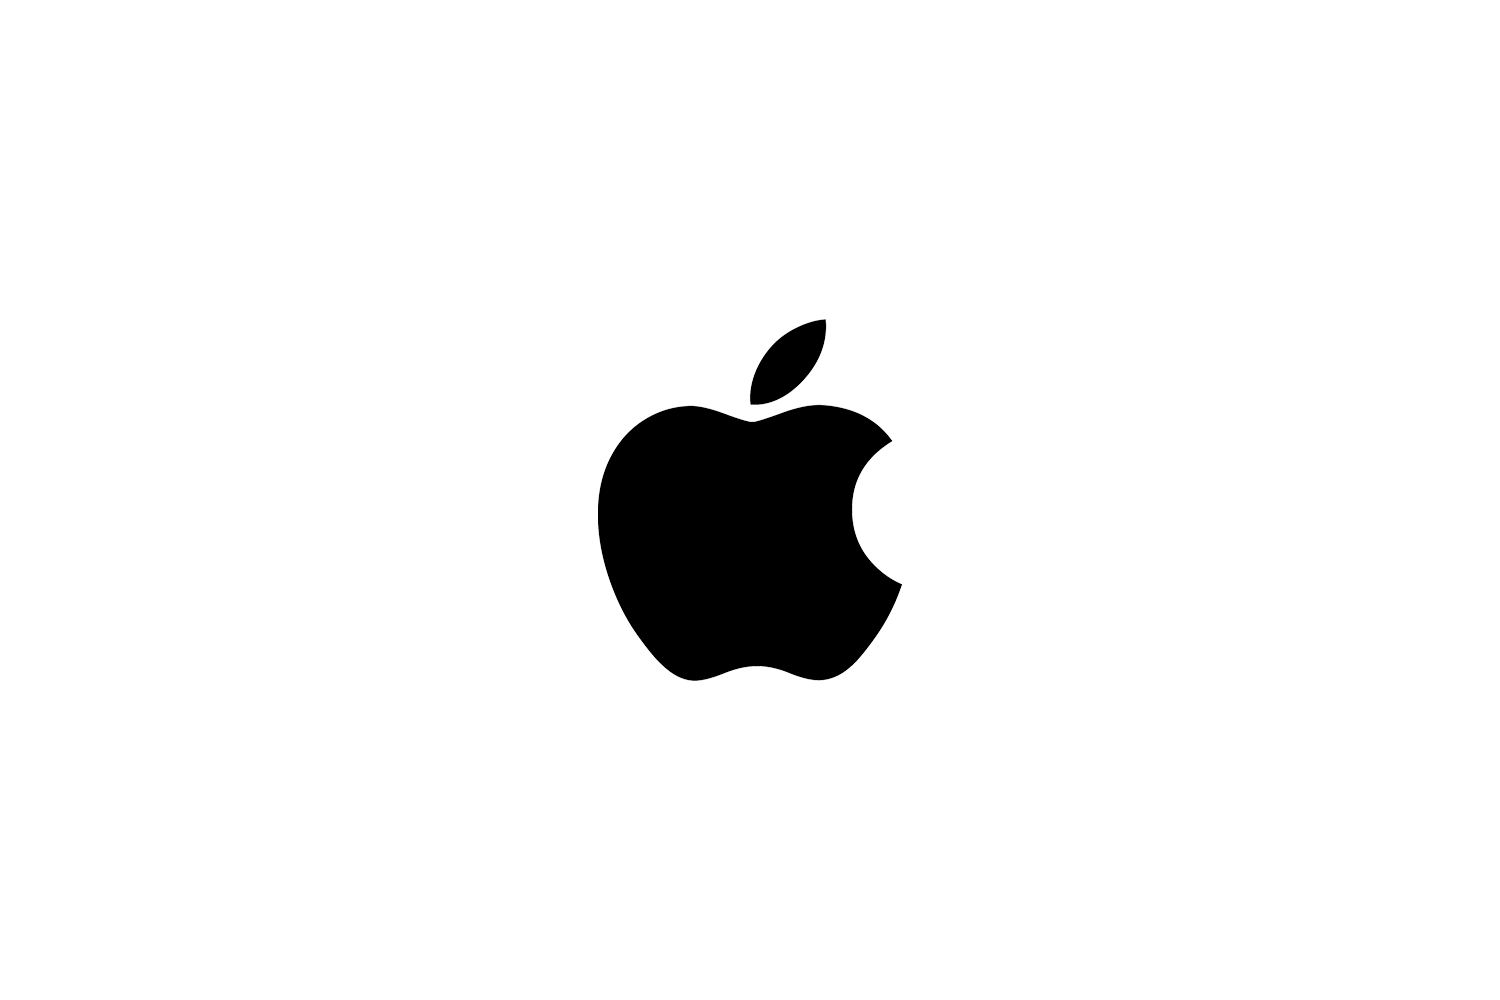 Apple Becomes First U.S. Company to Hit $1.5 Trillion in Market Value -  TechNET Digital Recruitment